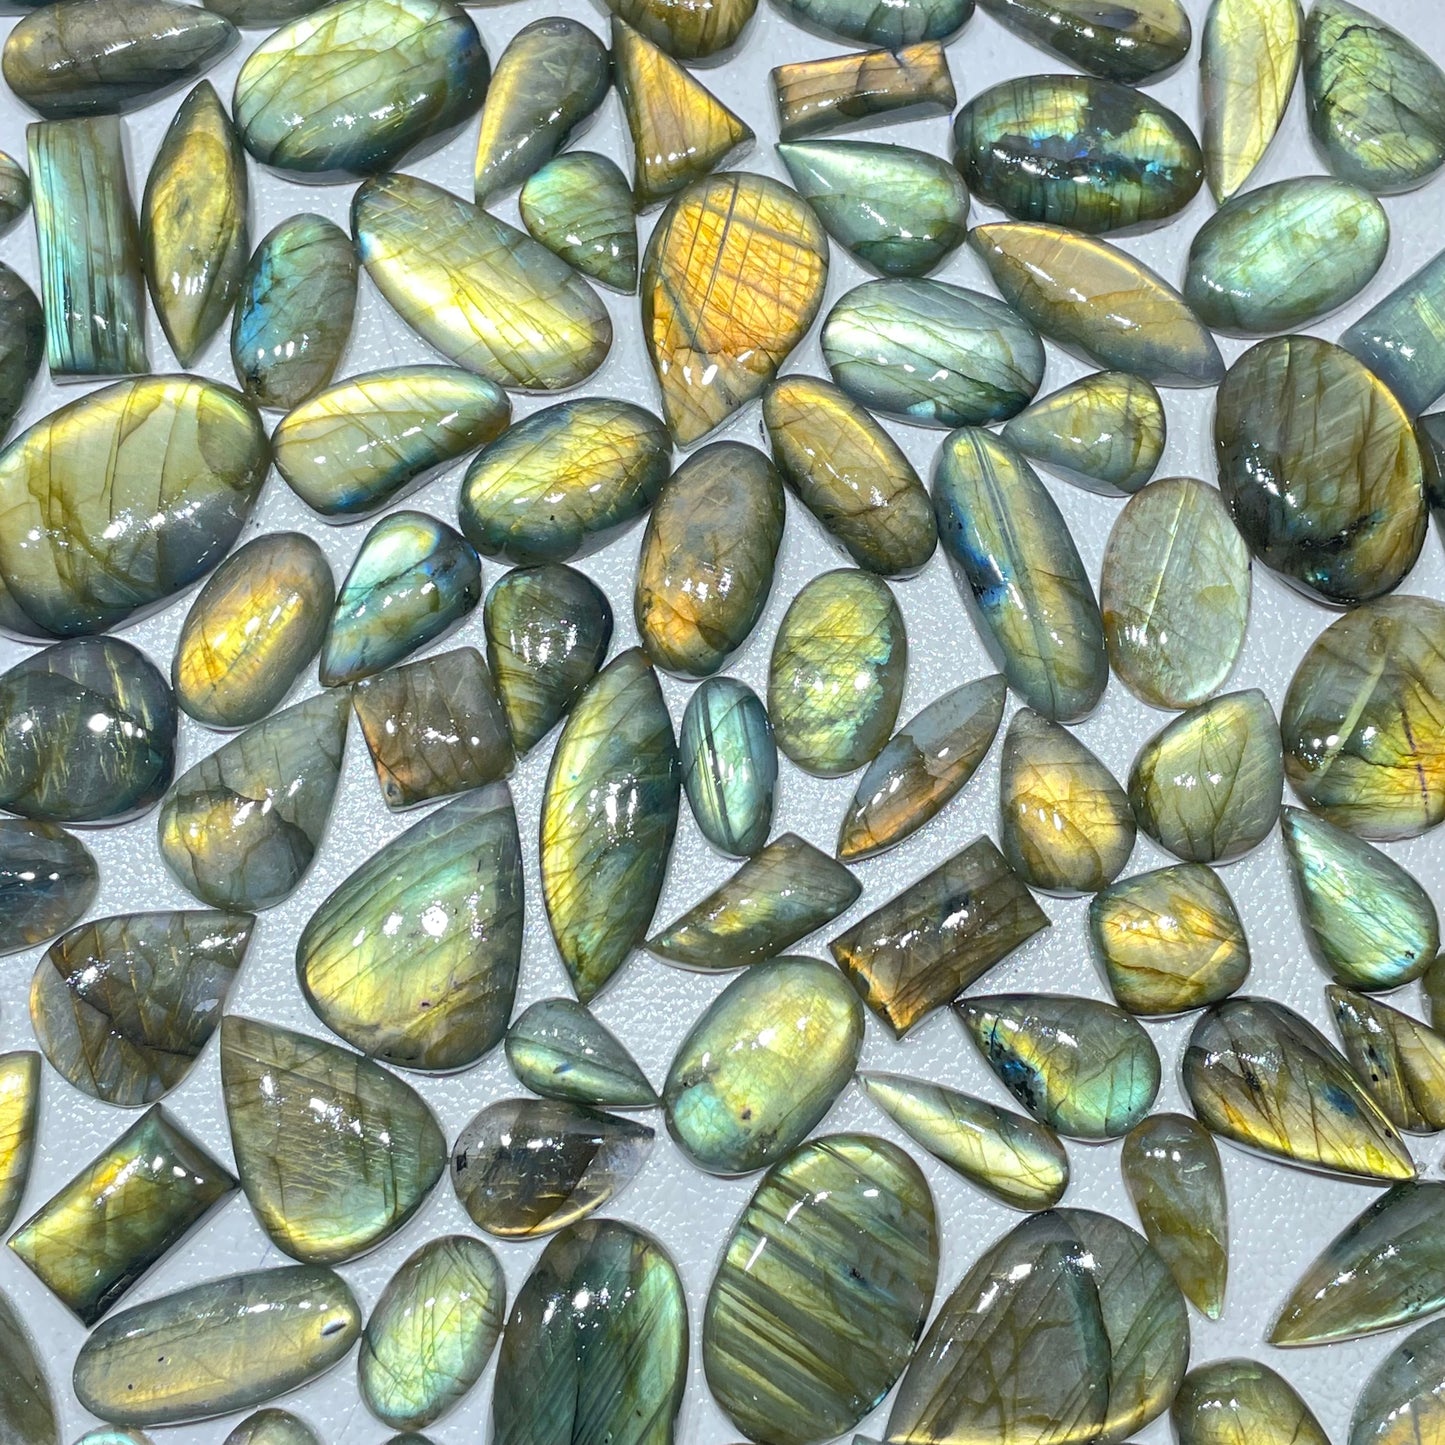 Discover the Mesmerizing Beauty of Handcrafted Yellow Flashy Labradorite Cabochons - High-Quality Gems at an Affordable Price